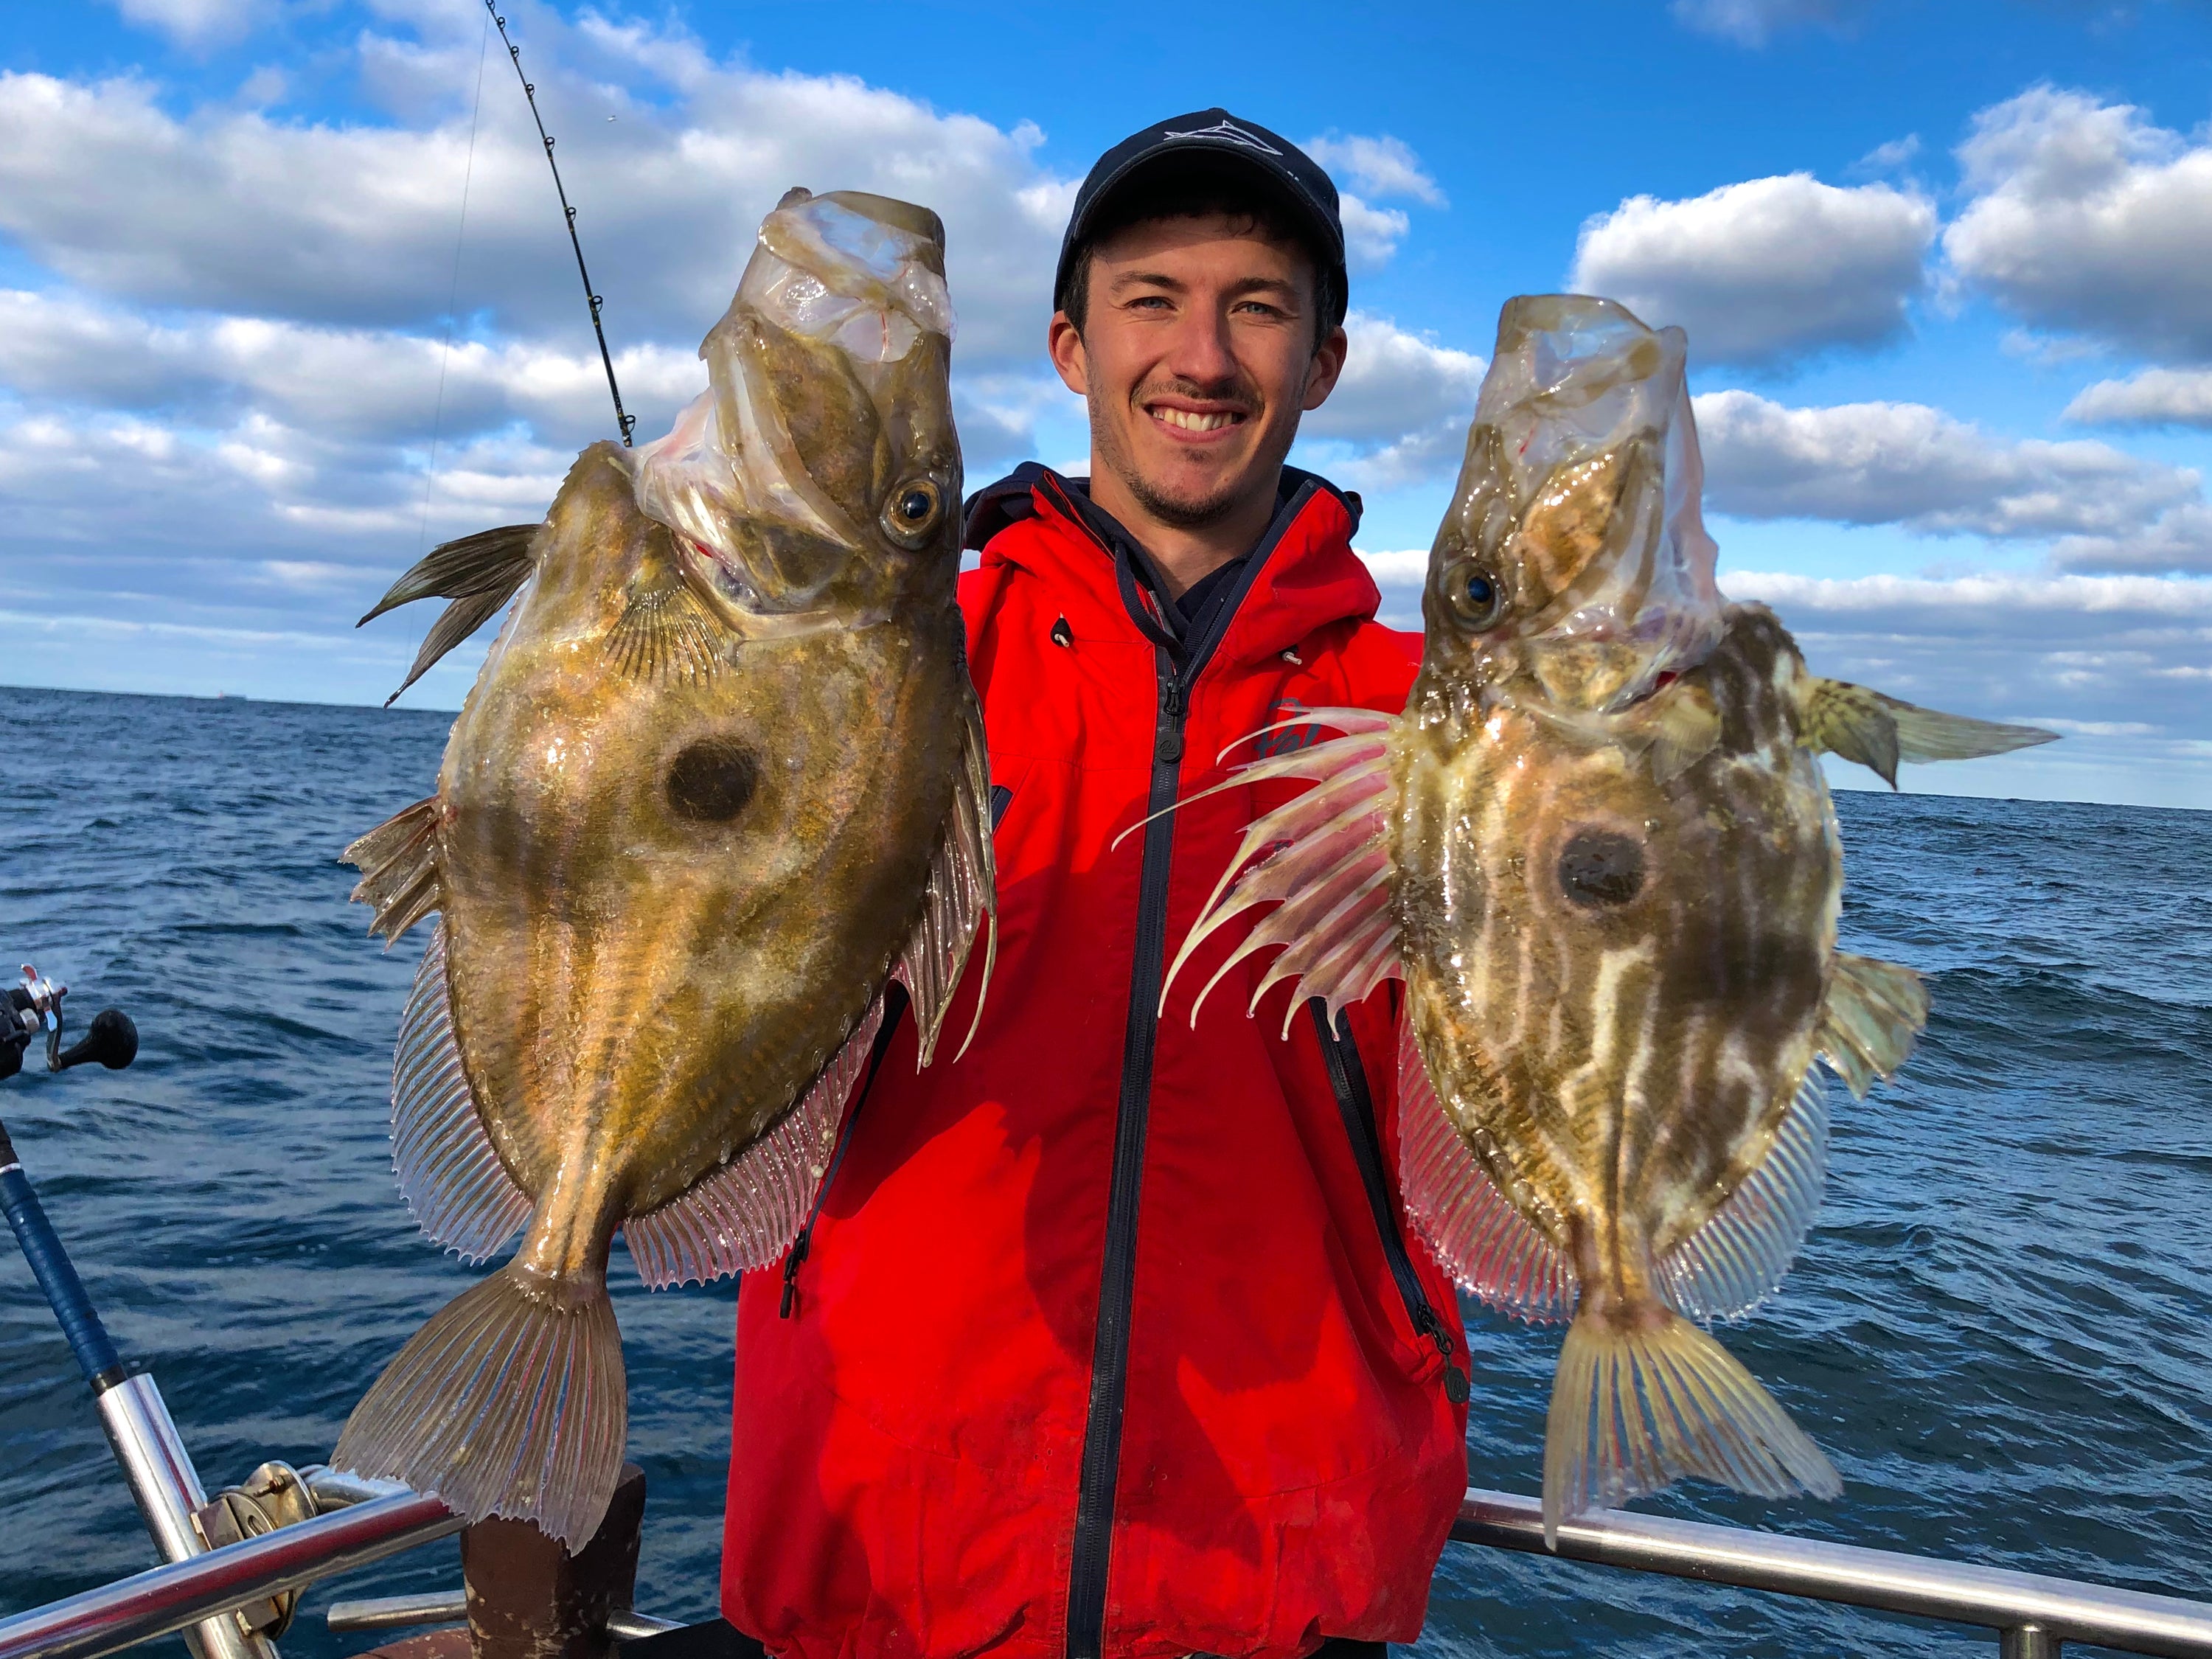 Liam with John Dory Fish caught from a boat in Cornwall